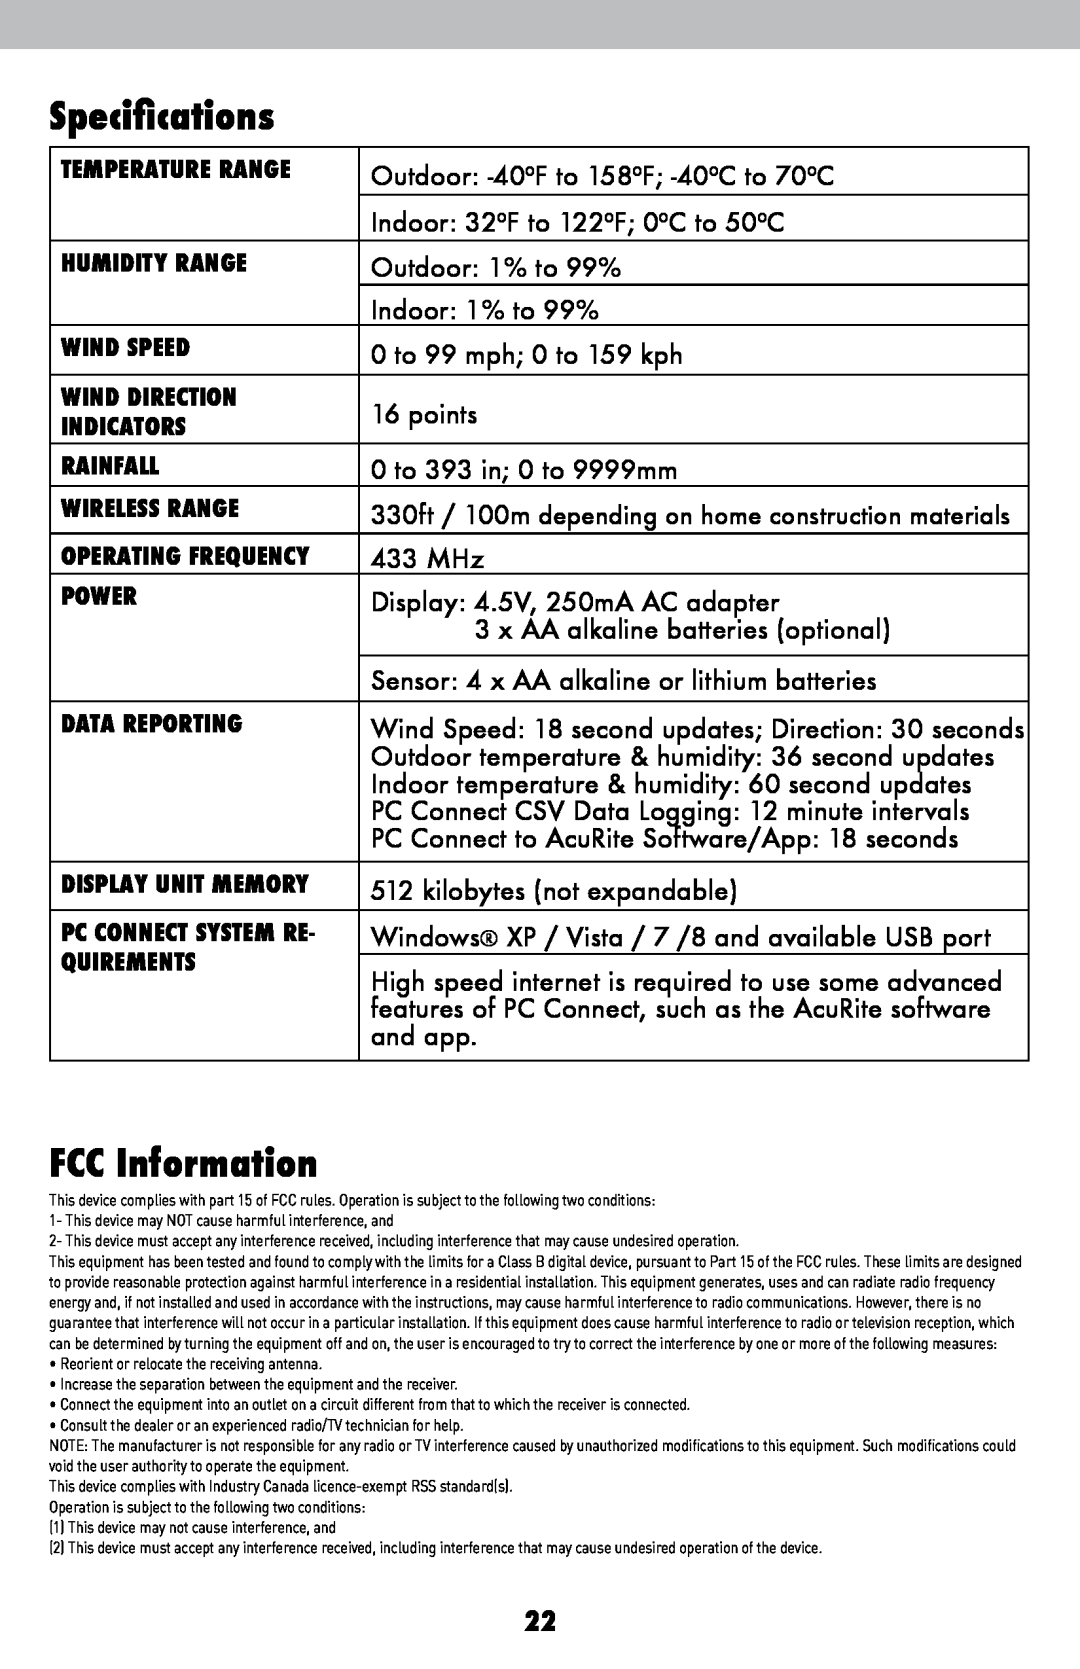 Acu-Rite 02032C / 888143 instruction manual Specifications, FCC Information 